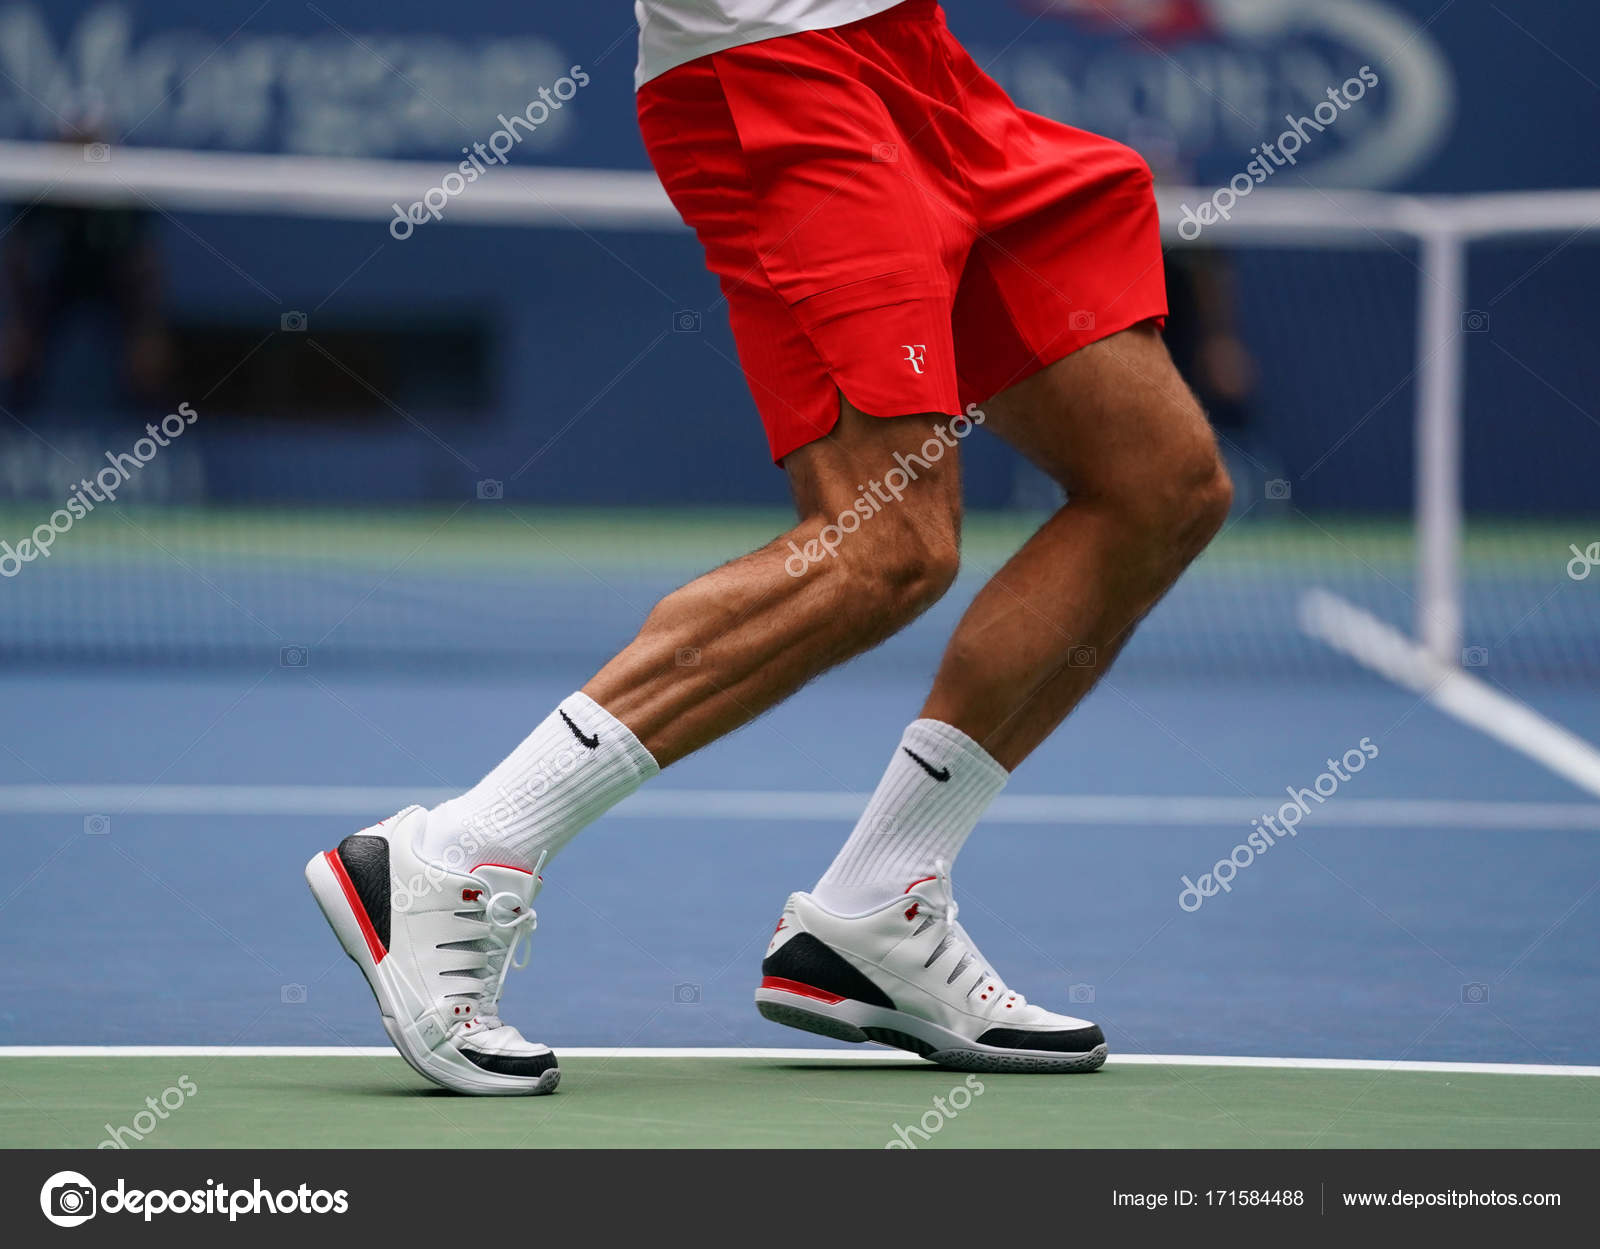 Grand Slam champion Roger of Switzerland custom Nike shoes during his US Open second round match – Stock Editorial Photo zhukovsky #171584488